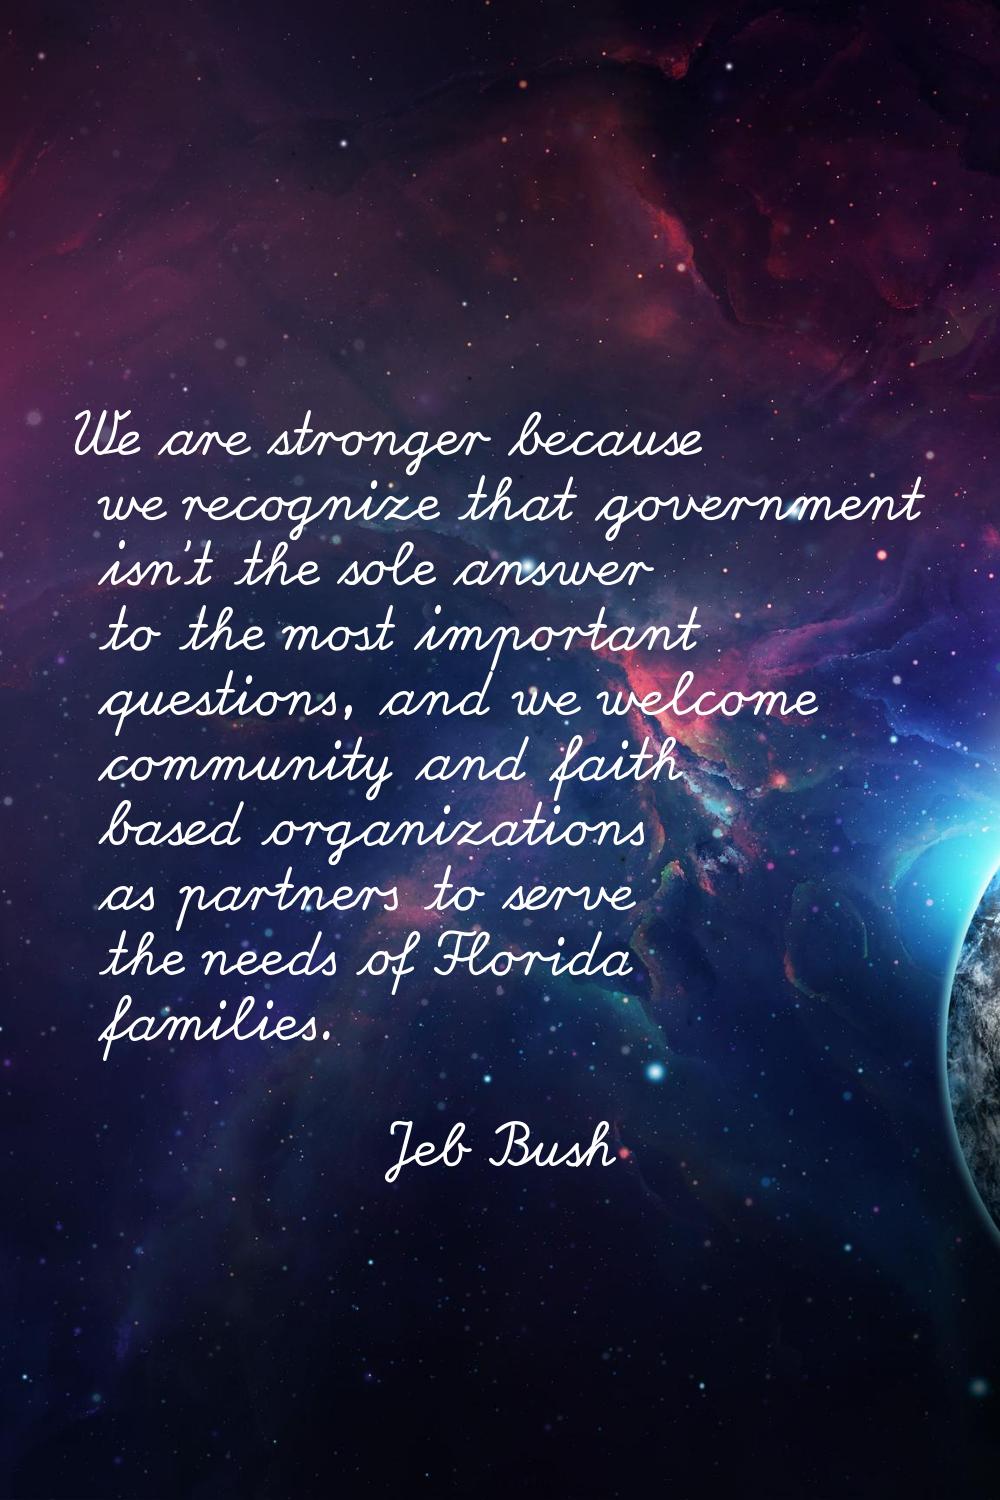 We are stronger because we recognize that government isn't the sole answer to the most important qu